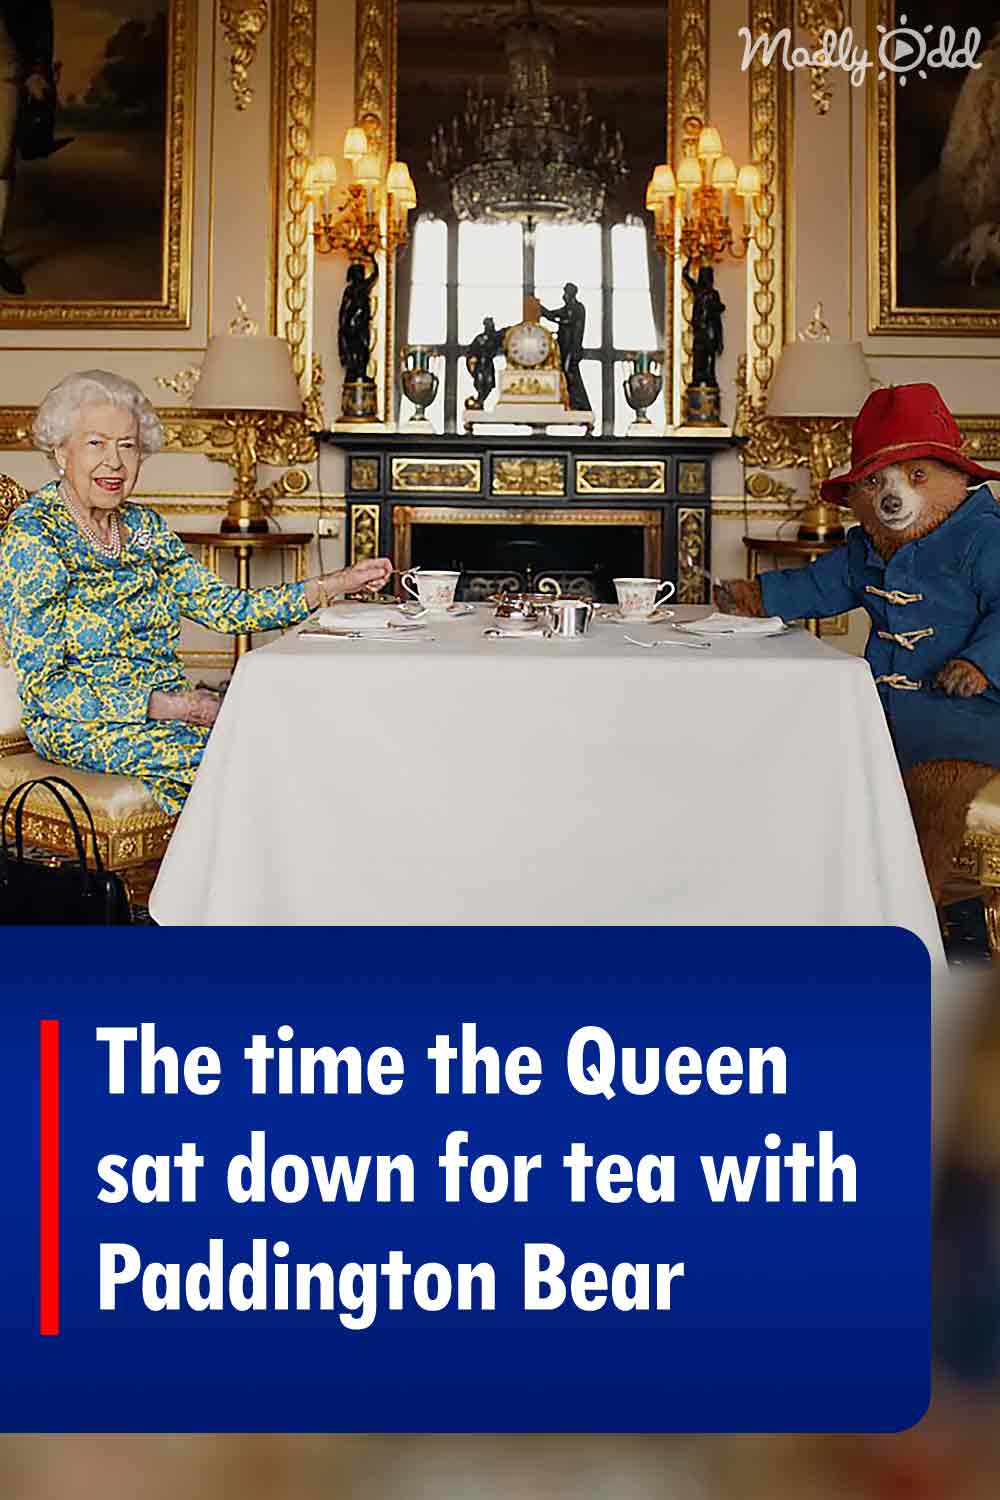 The time the Queen sat down for tea with Paddington Bear